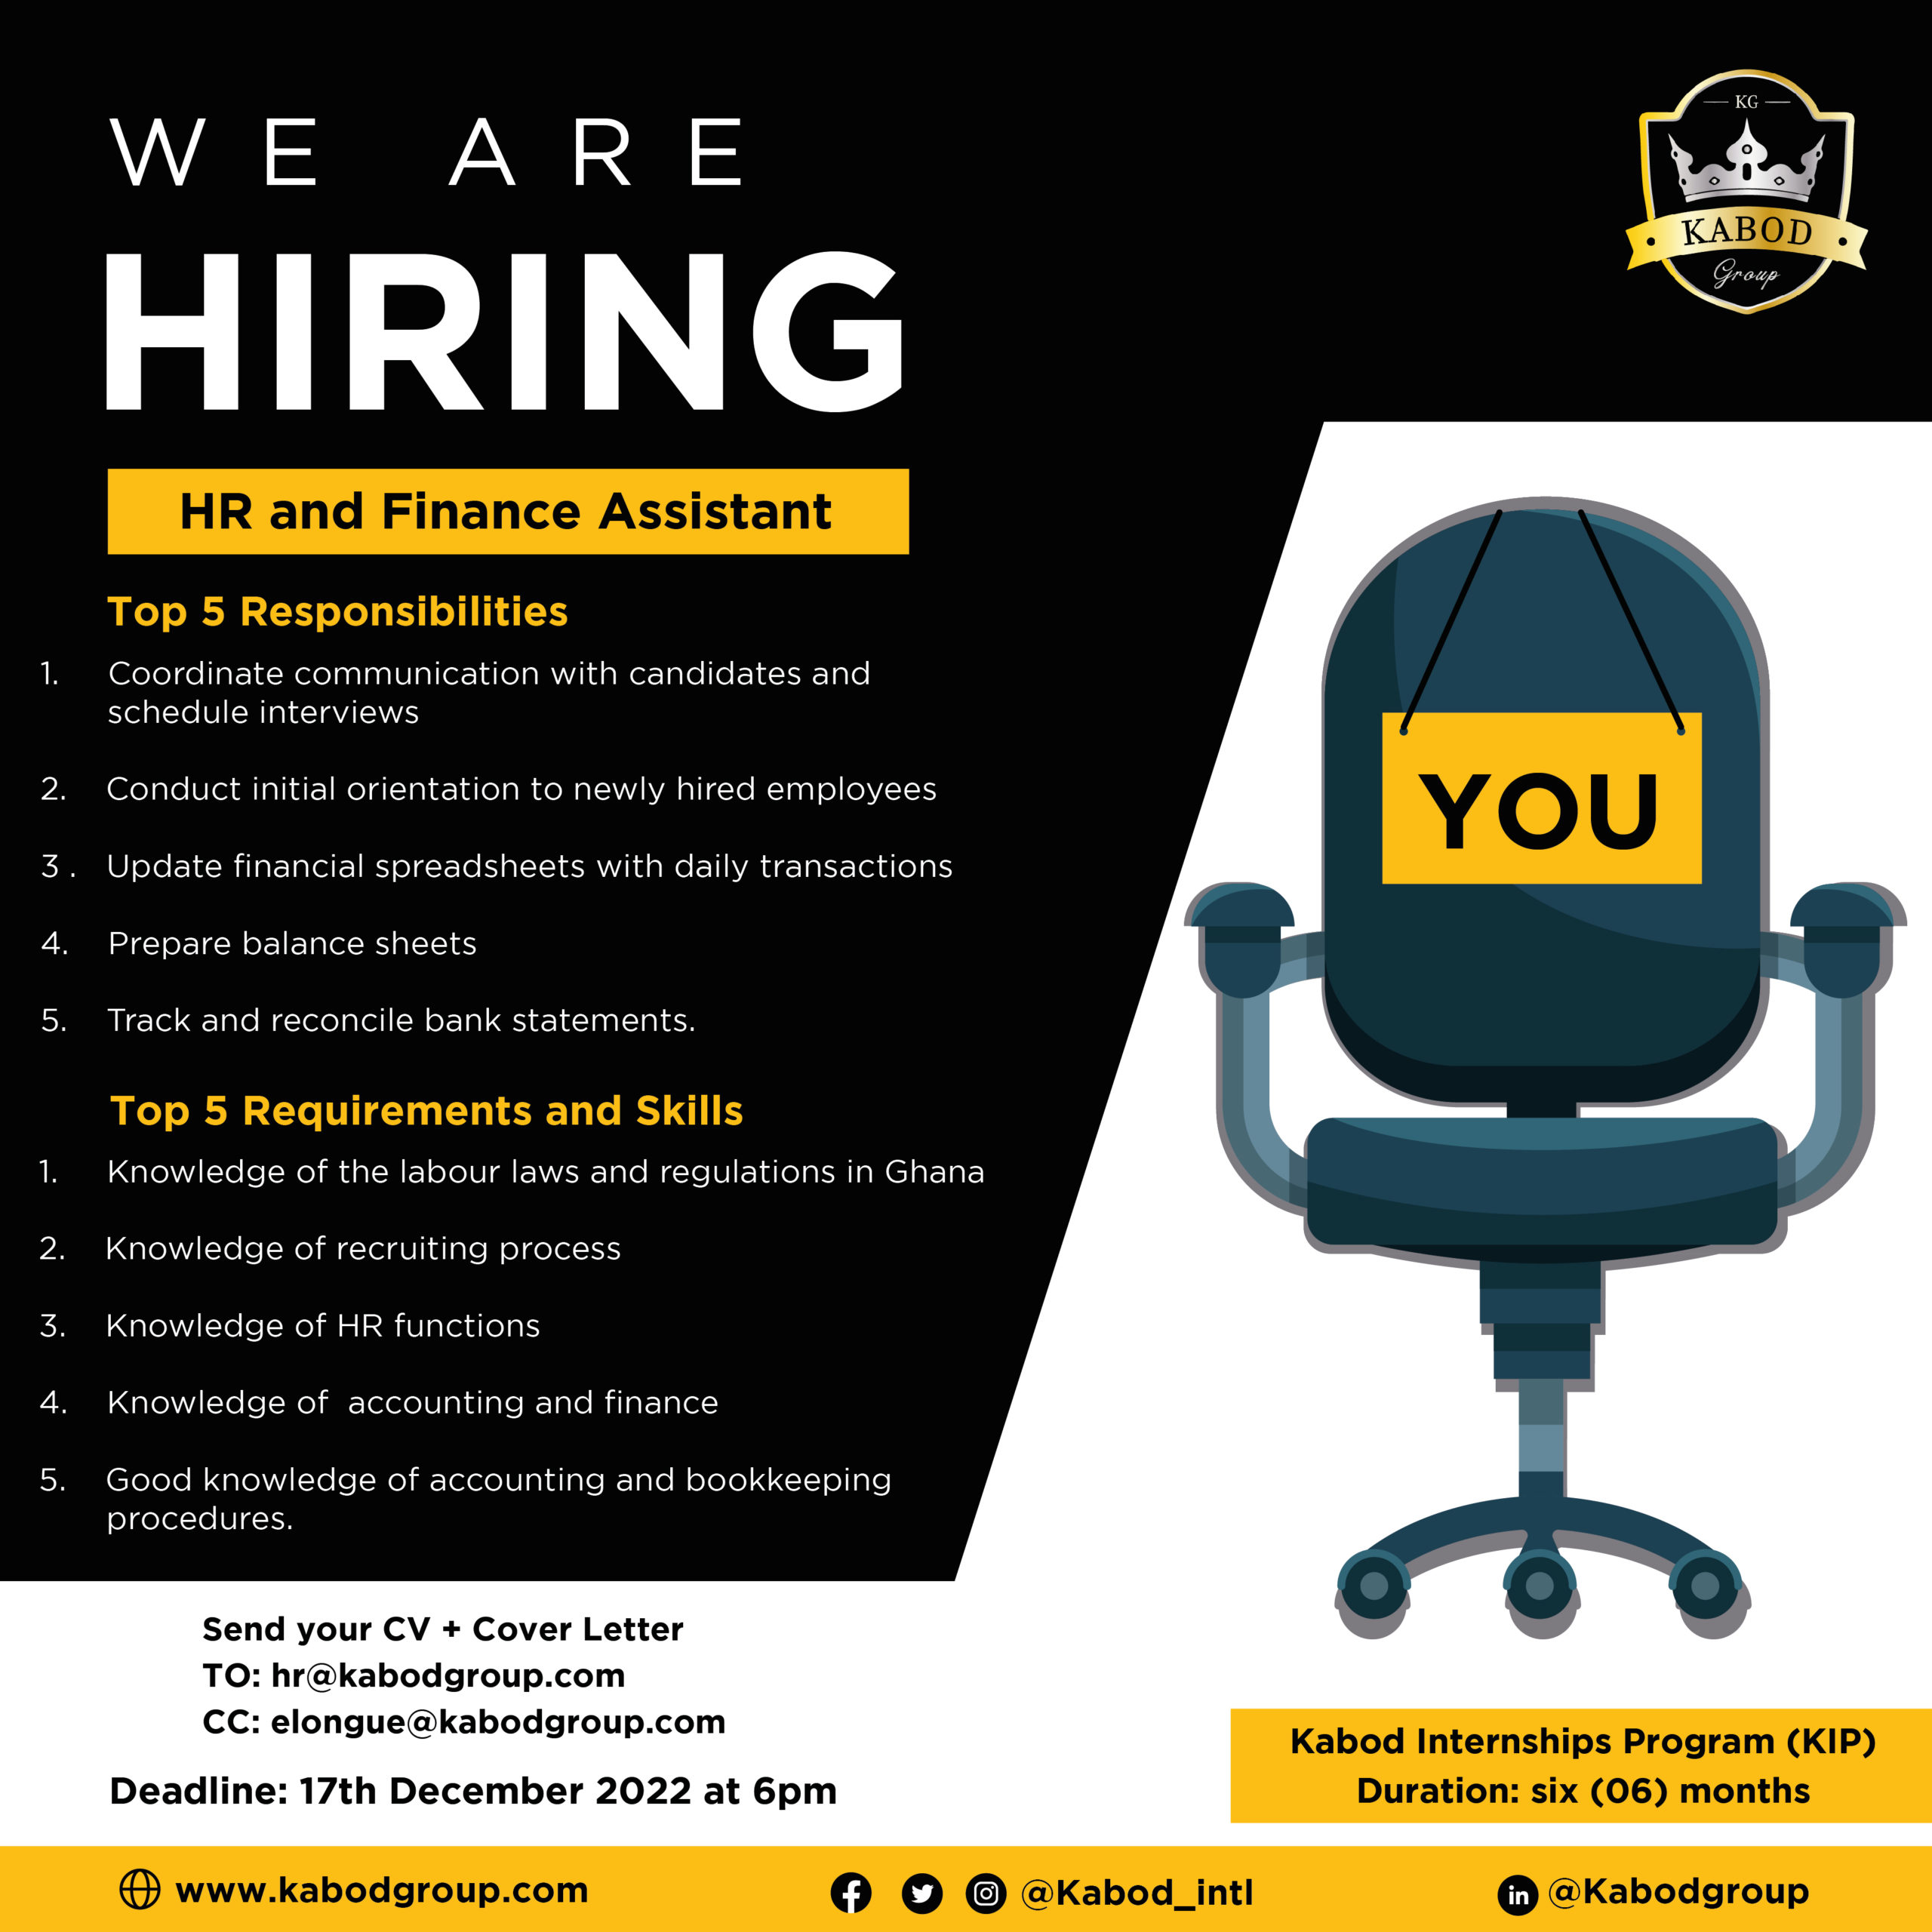 We Are Hiring HR and Finance Assistant